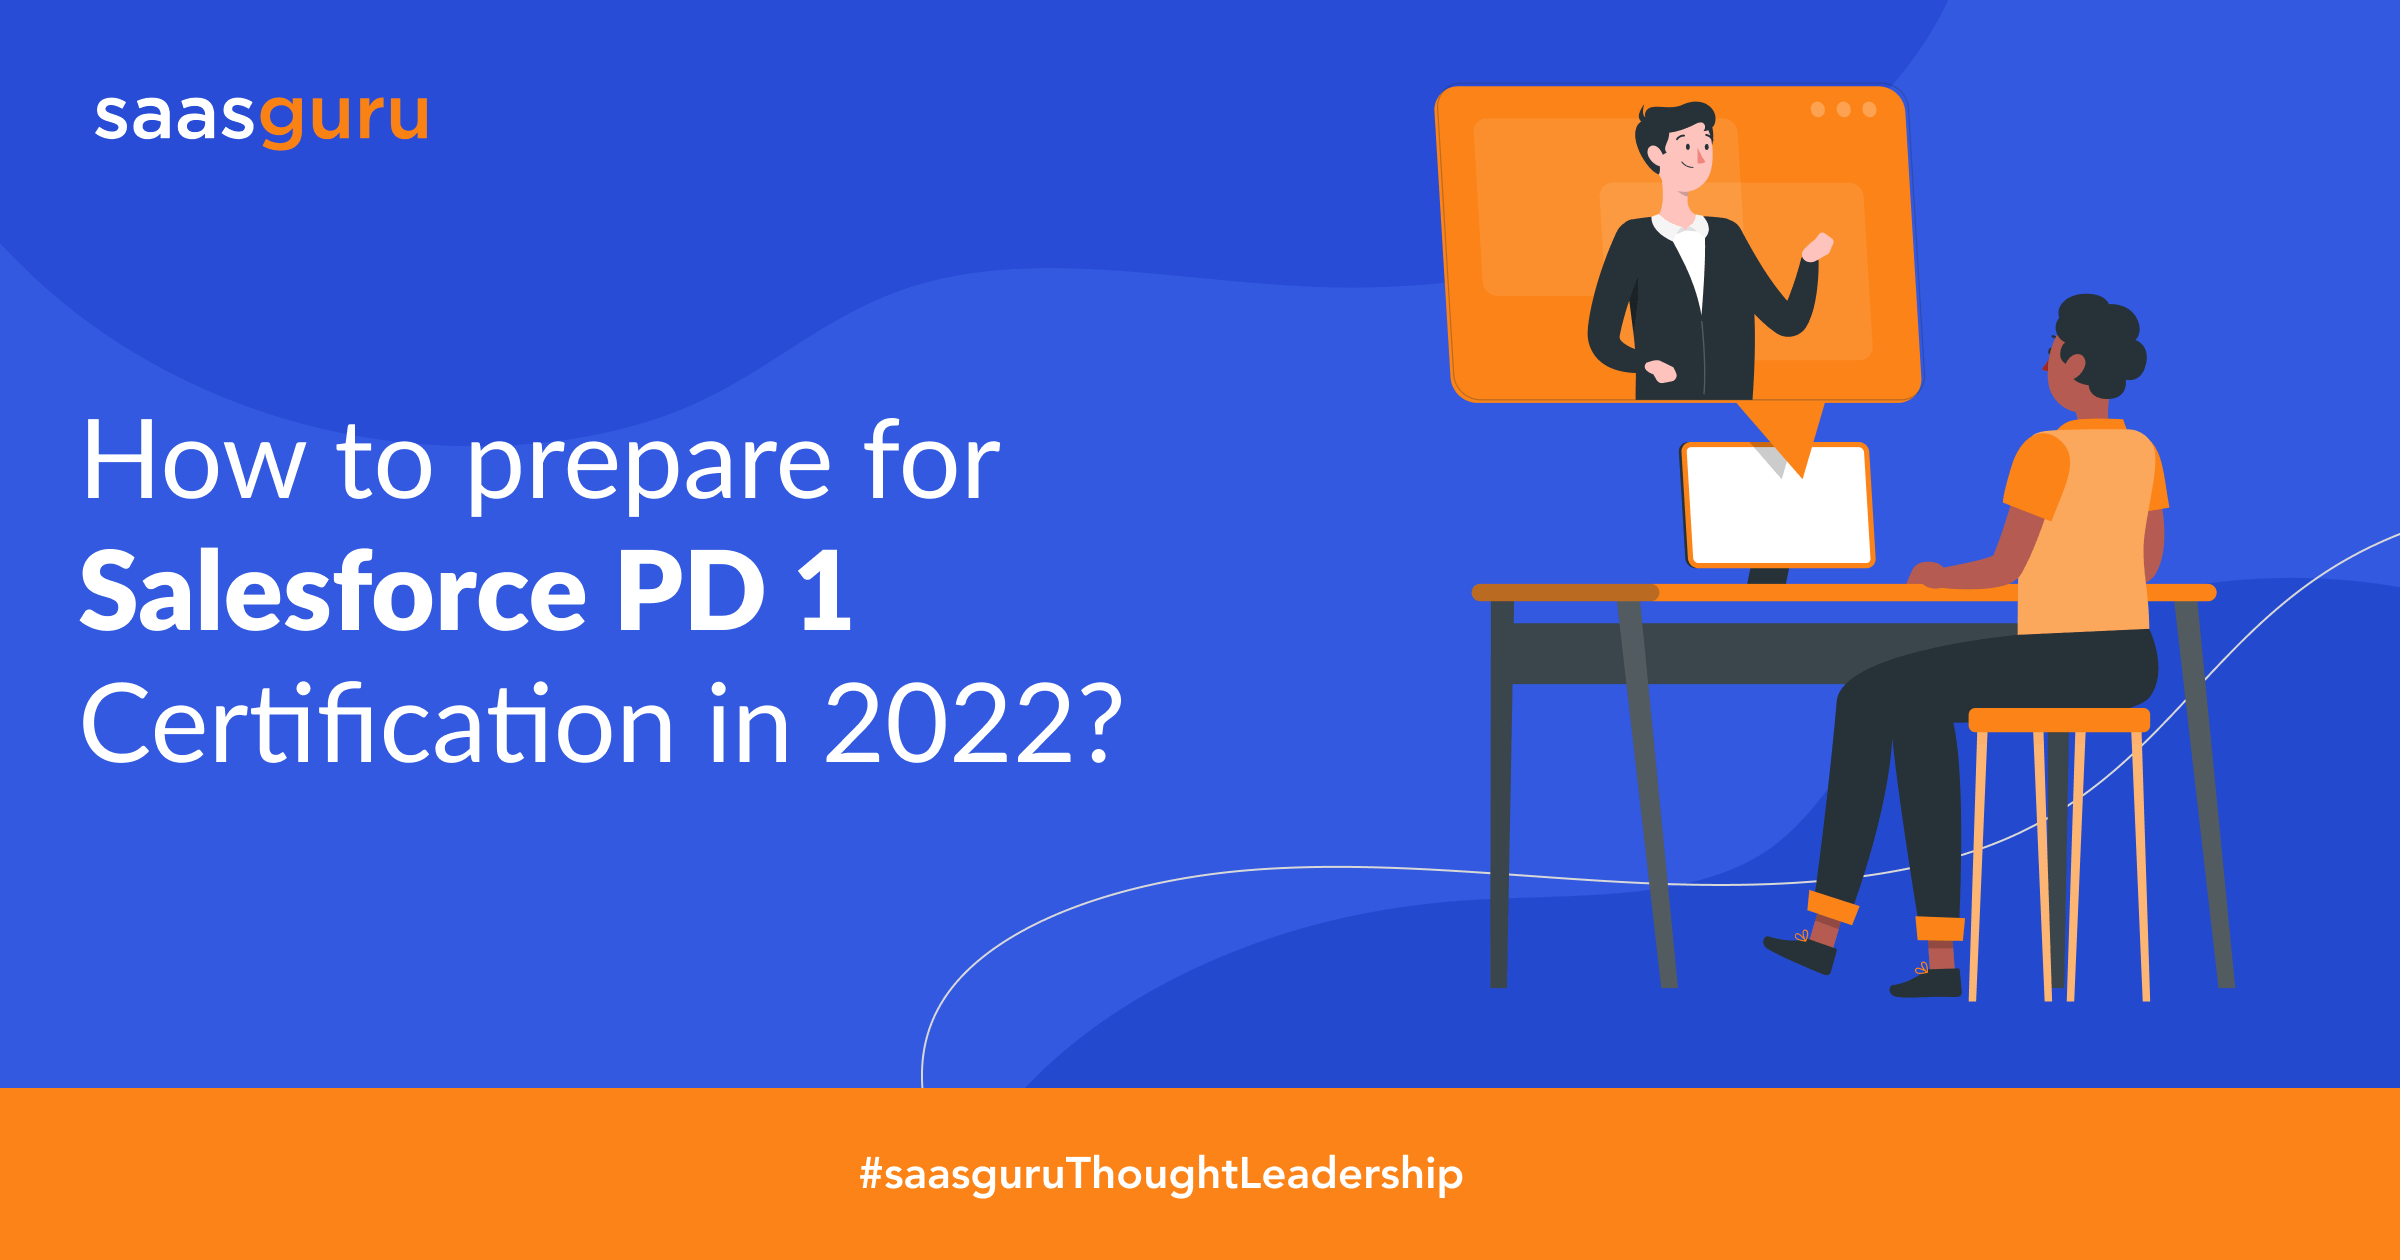 How to prepare for Salesforce PD 1 Certification in 2022?